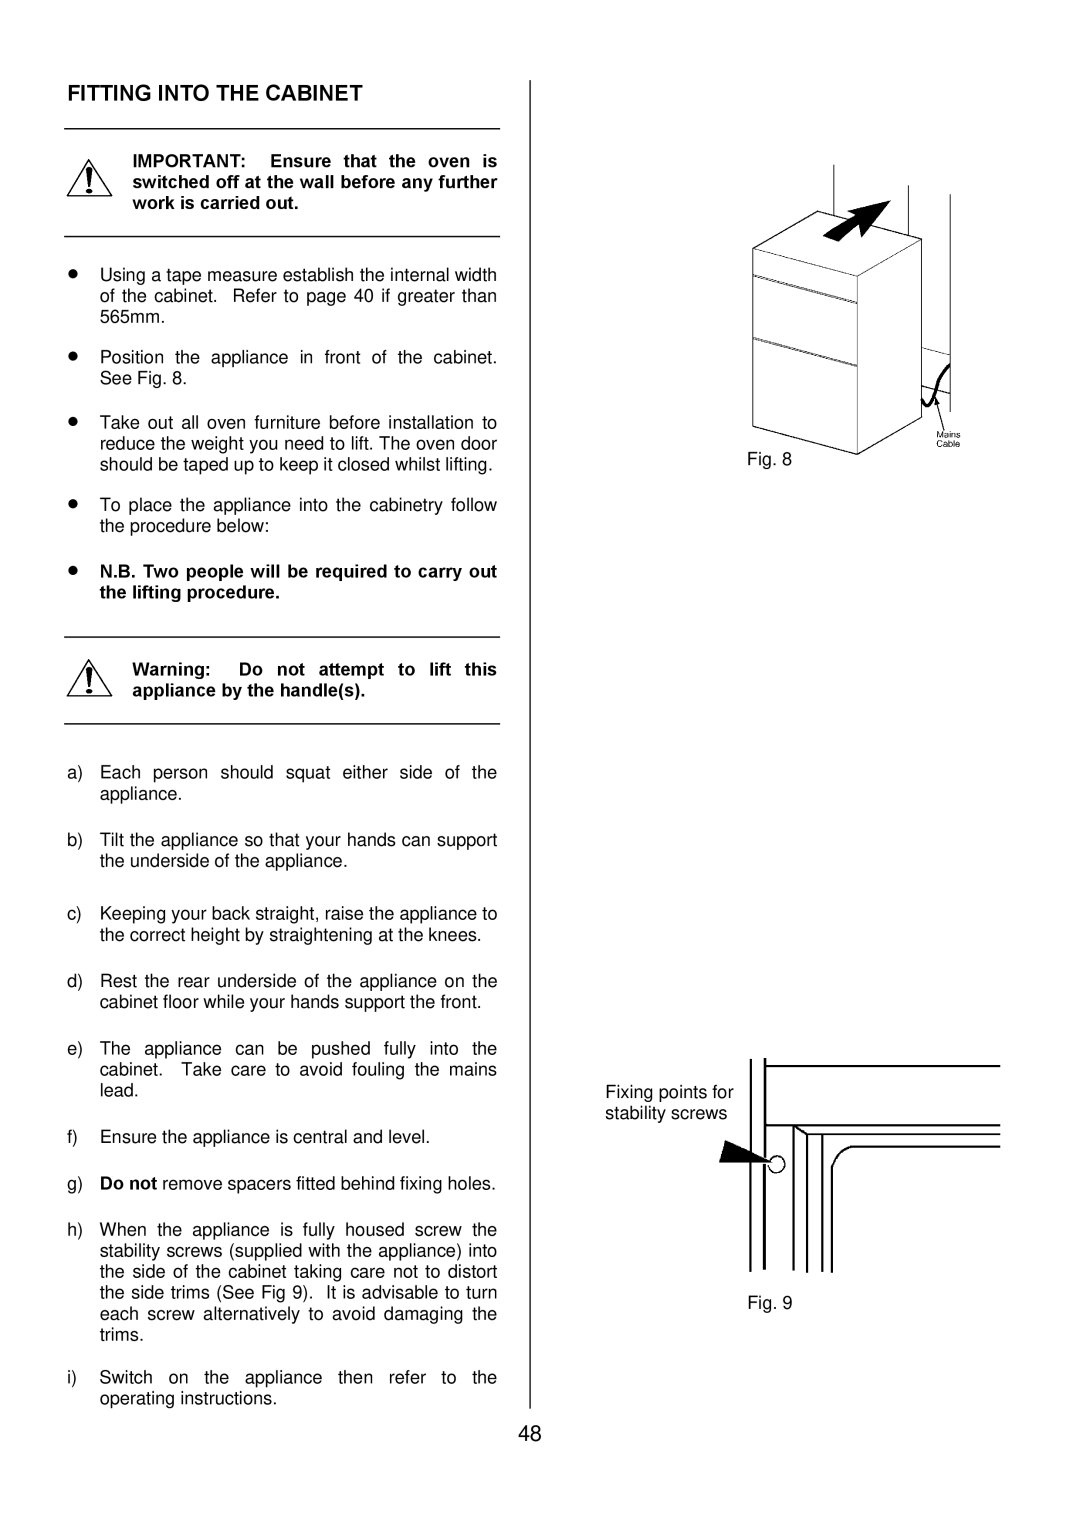 Electrolux D8800-4 operating instructions Fitting Into the Cabinet 